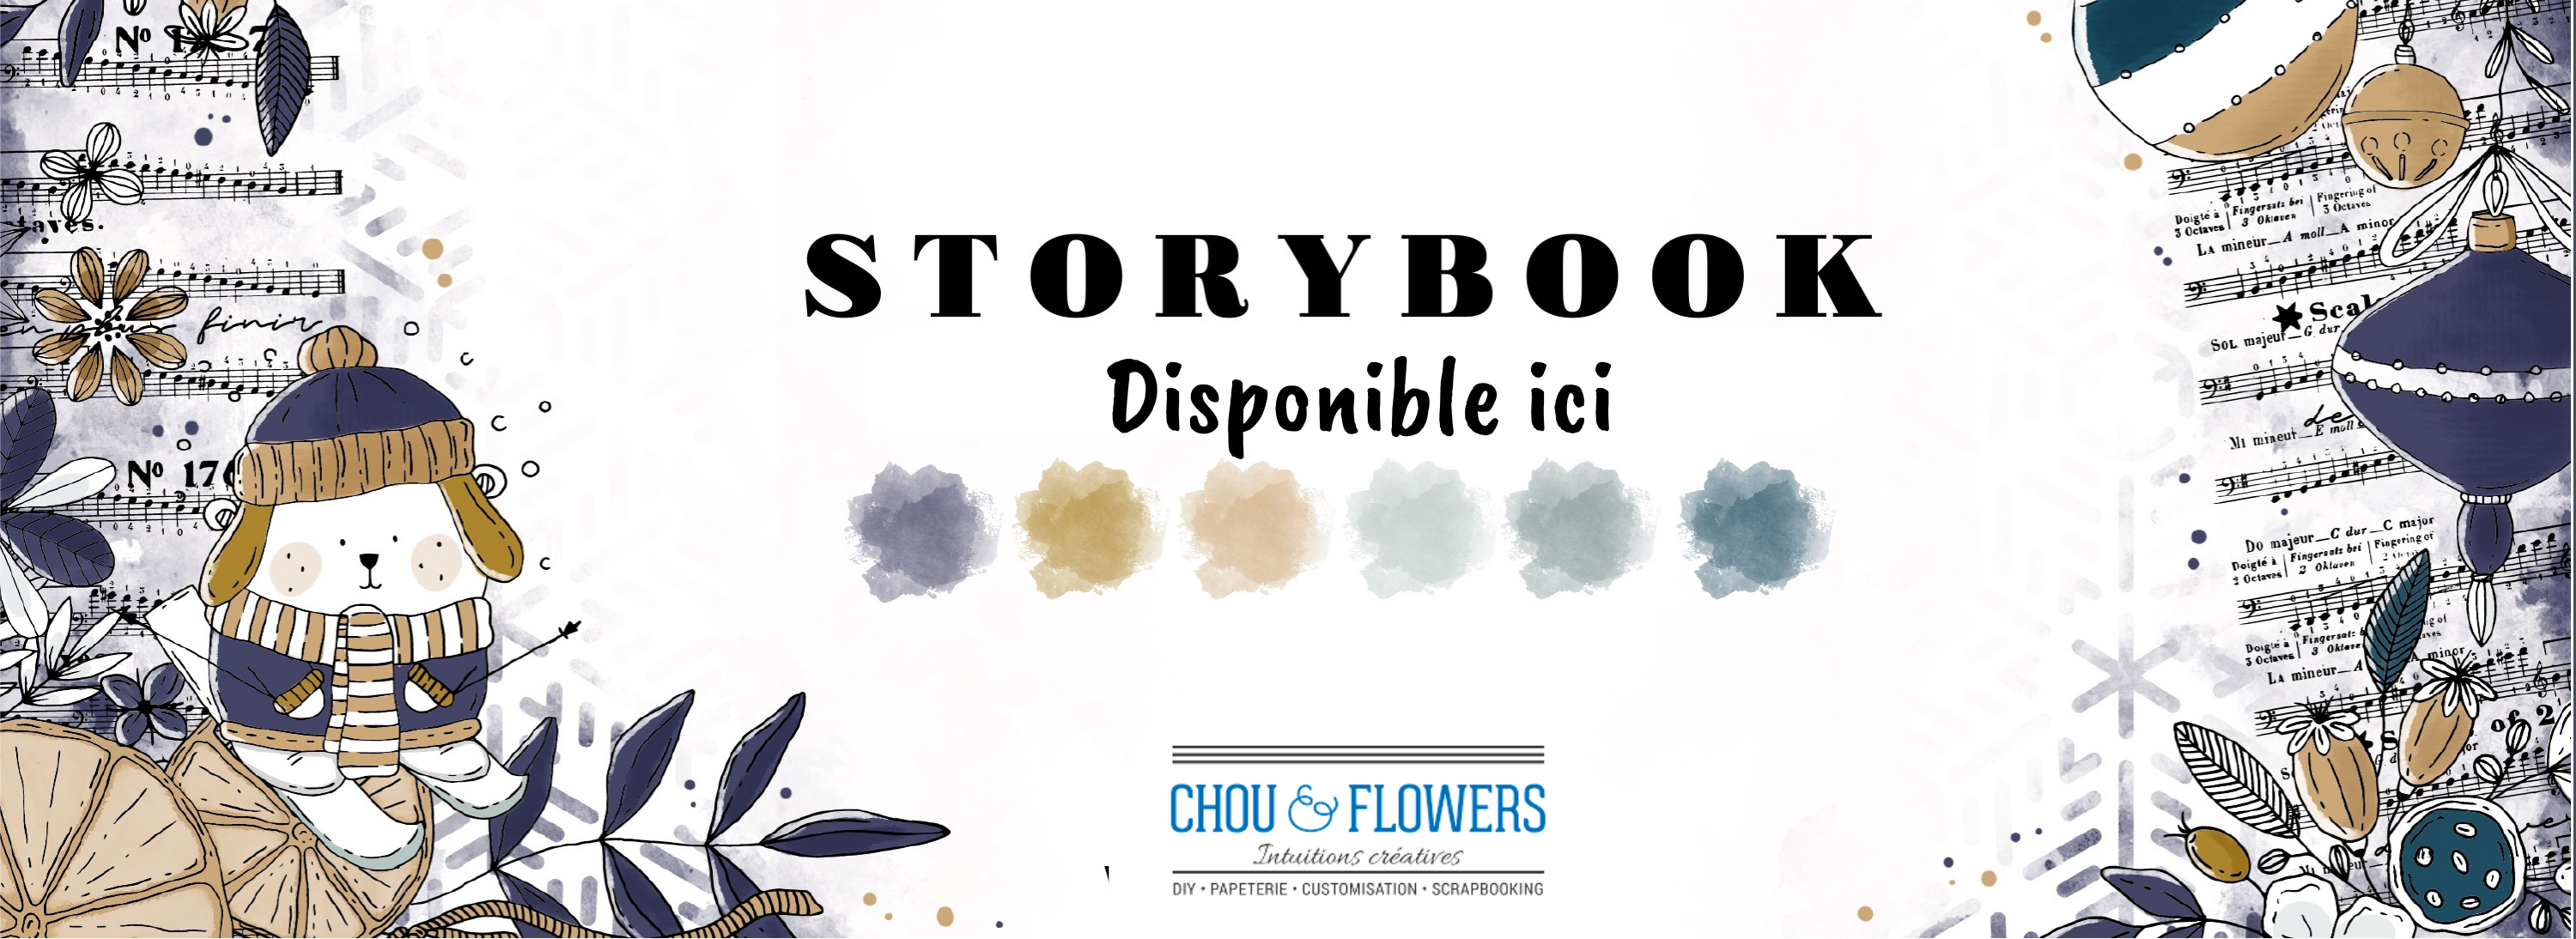 storybook chou and flowers toutencolle